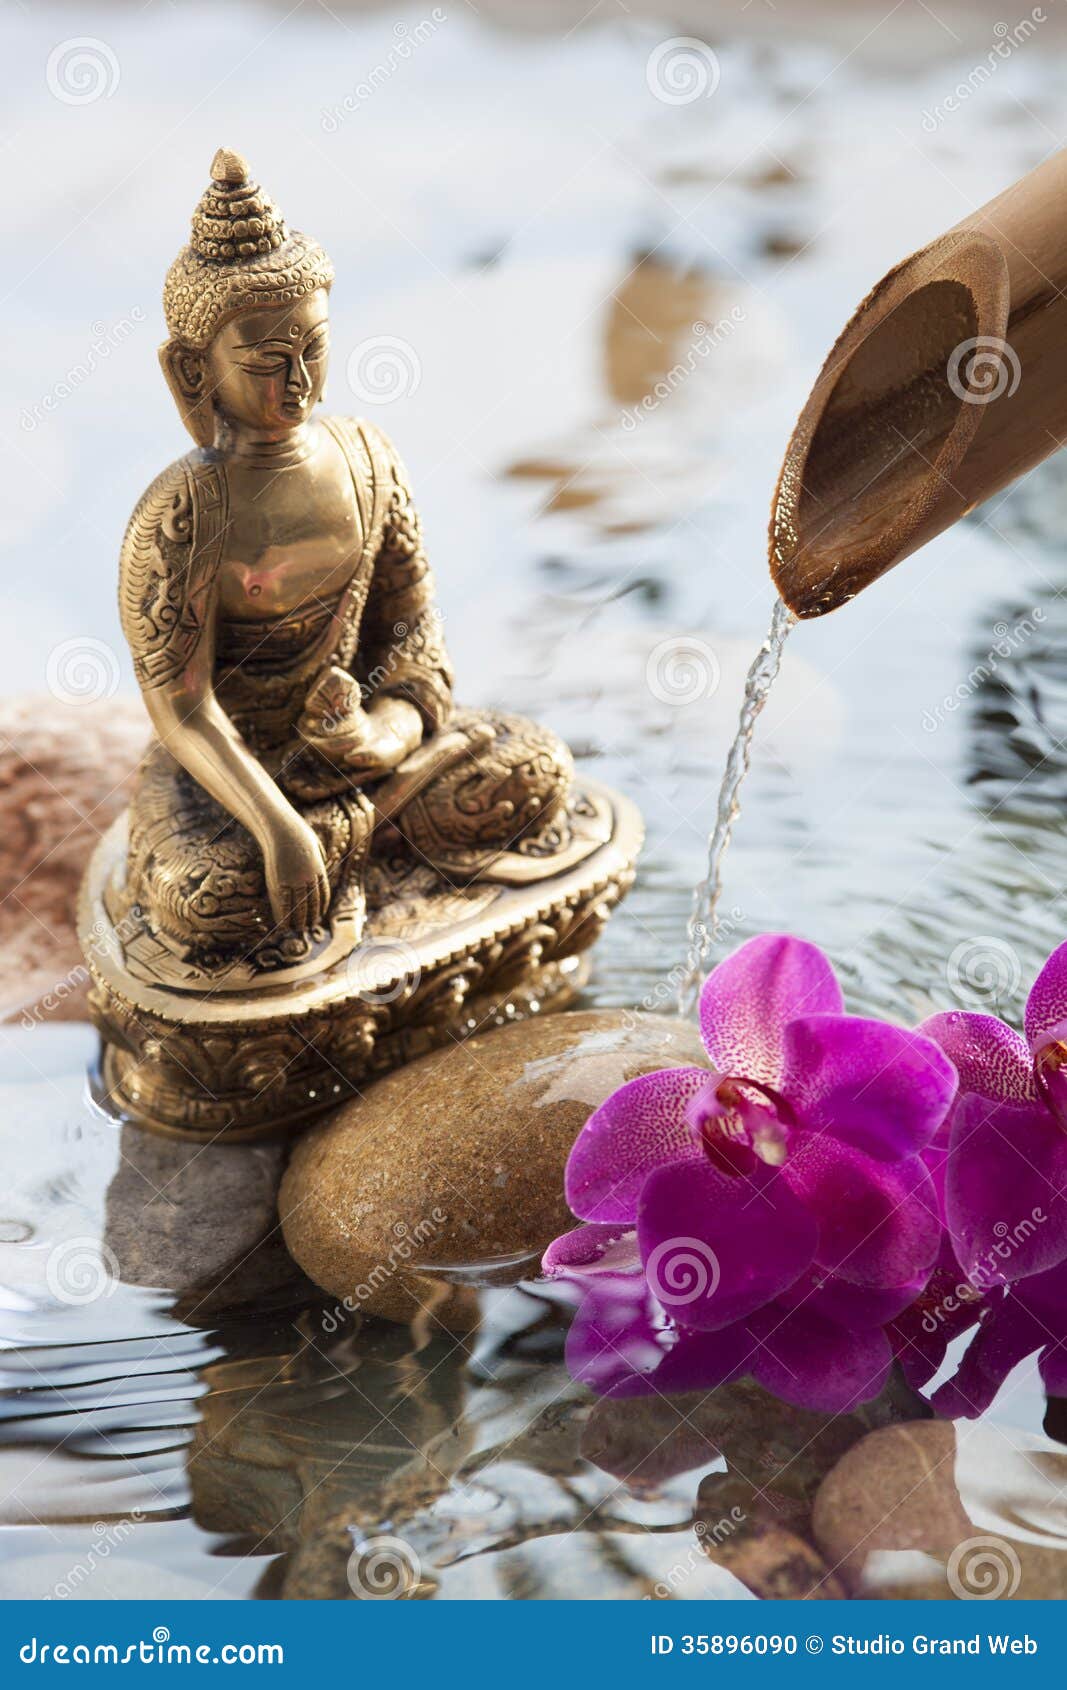 Religious Symbol with Dropping Water and Flowers Stock Photo - Image of ...